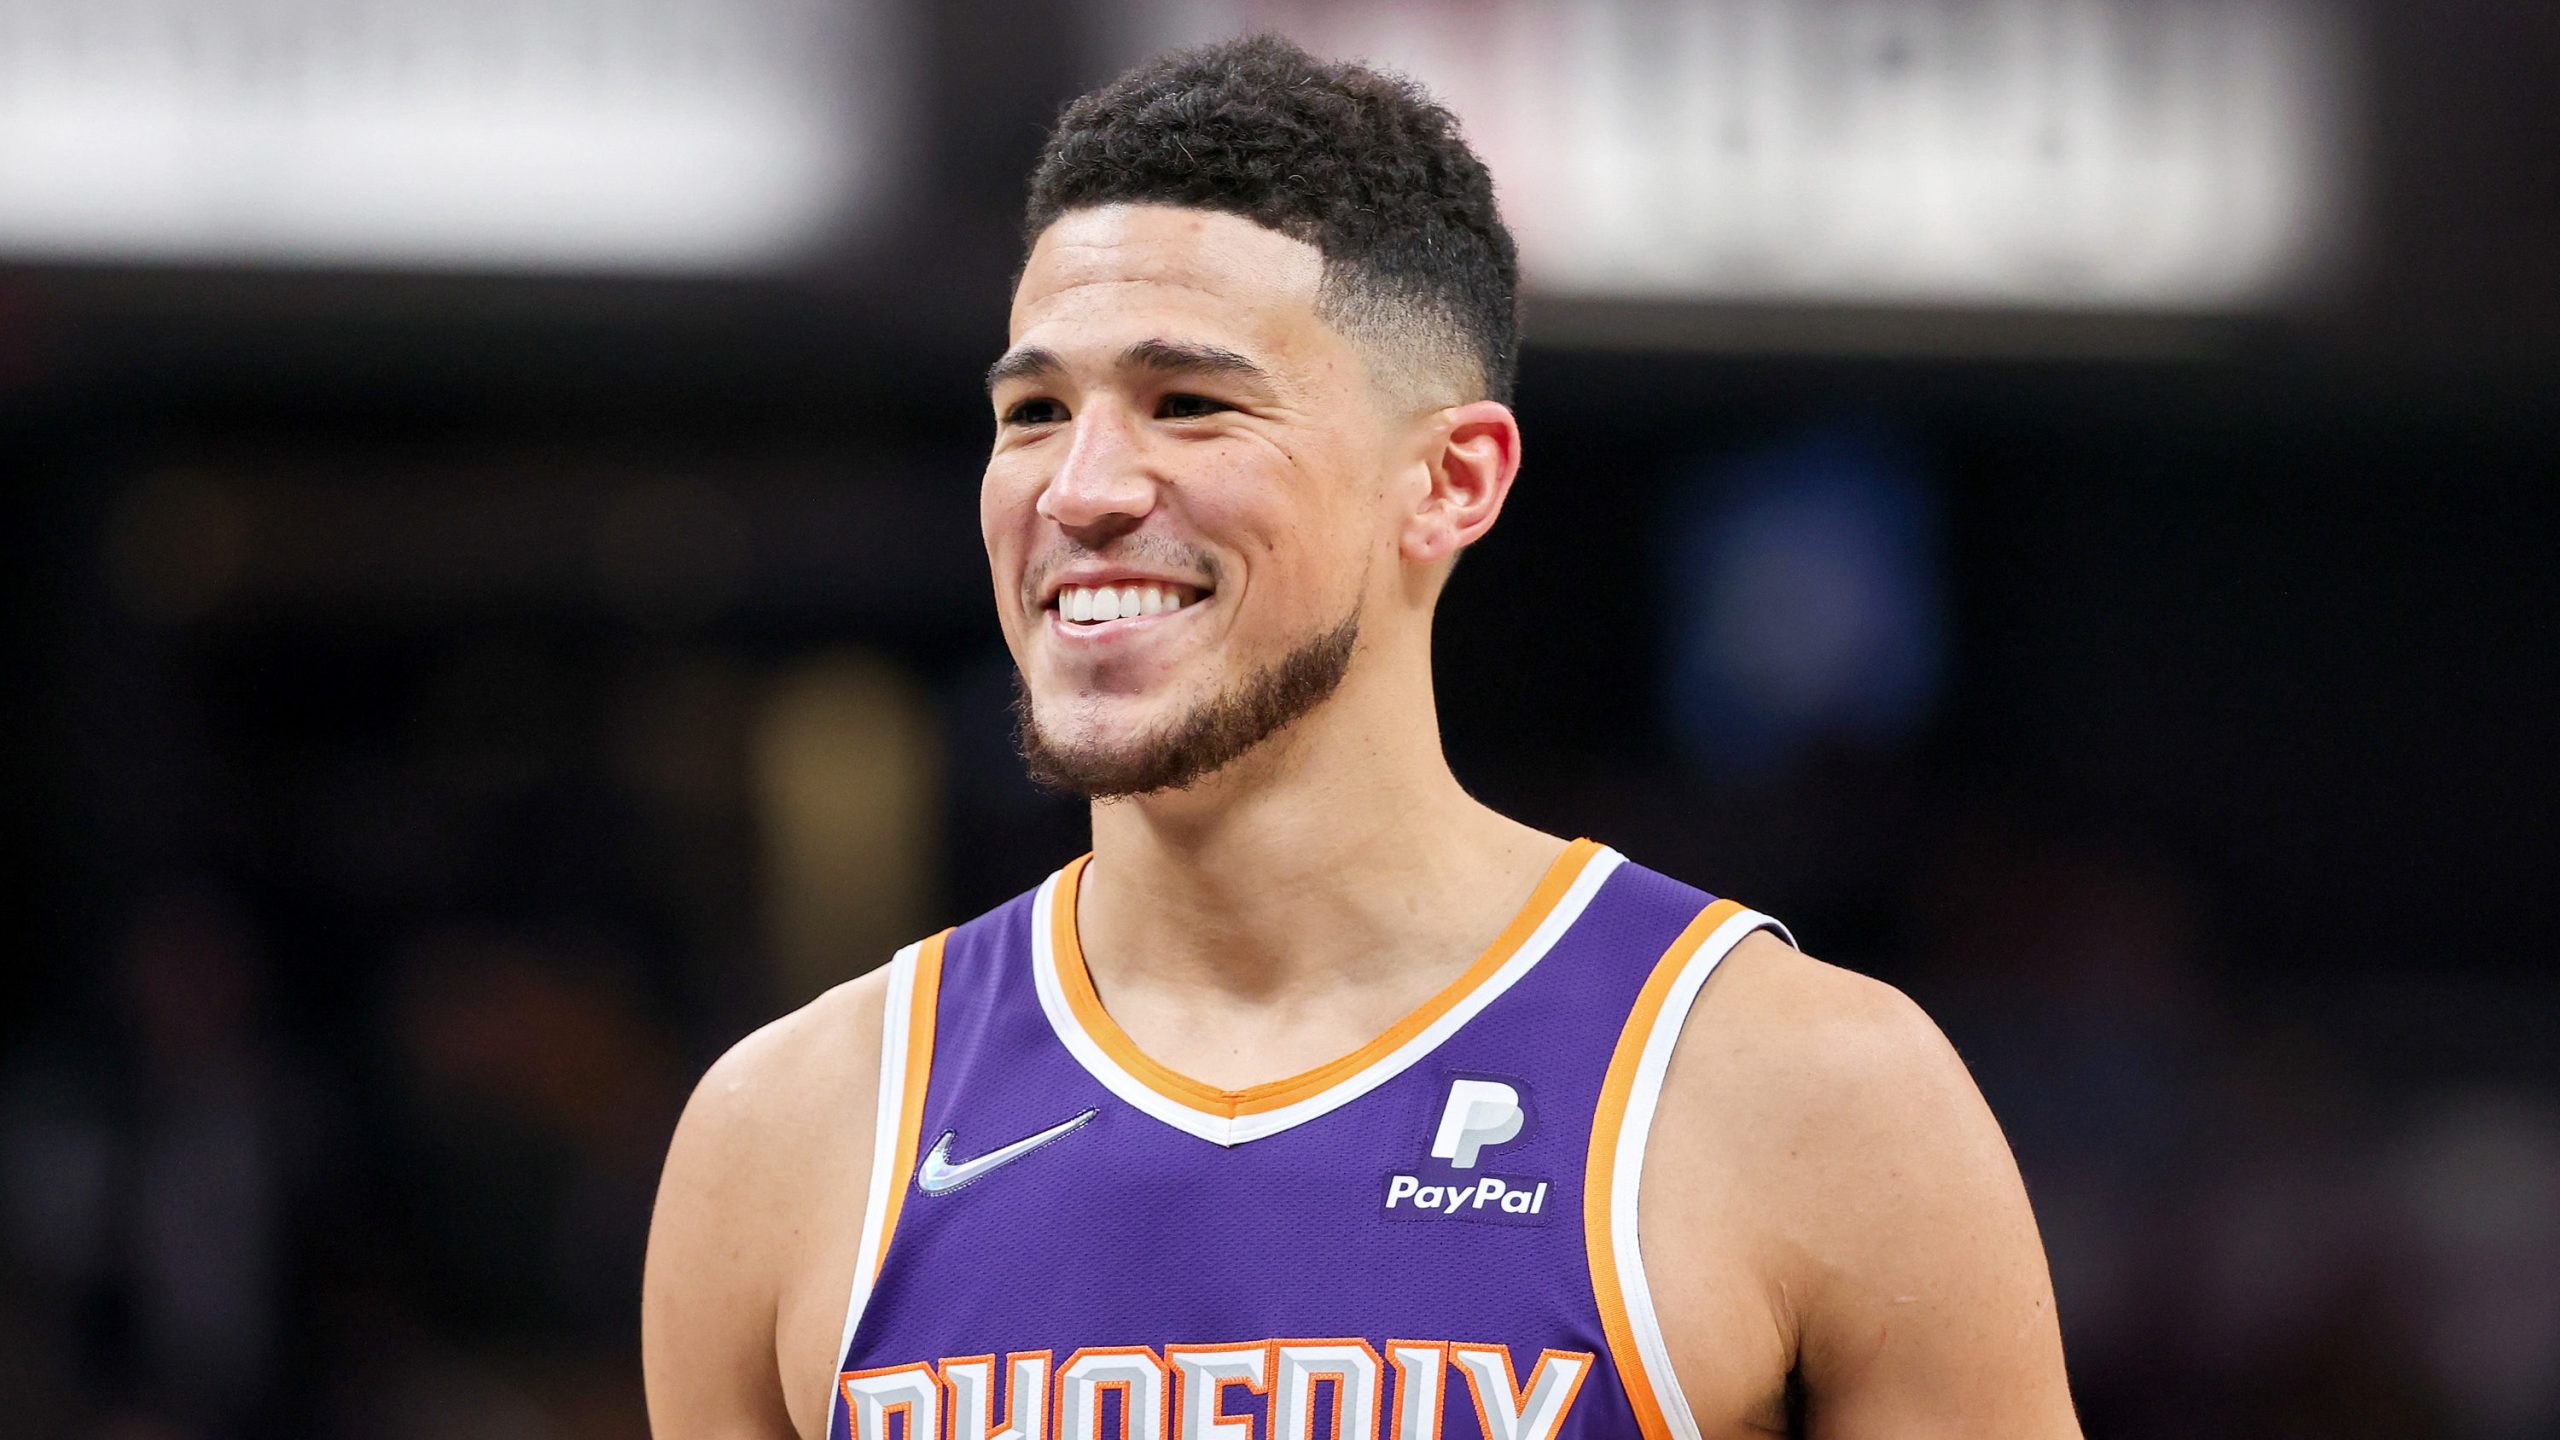 Devin Booker’s Boat party Photos with A Model going Viral Following ...